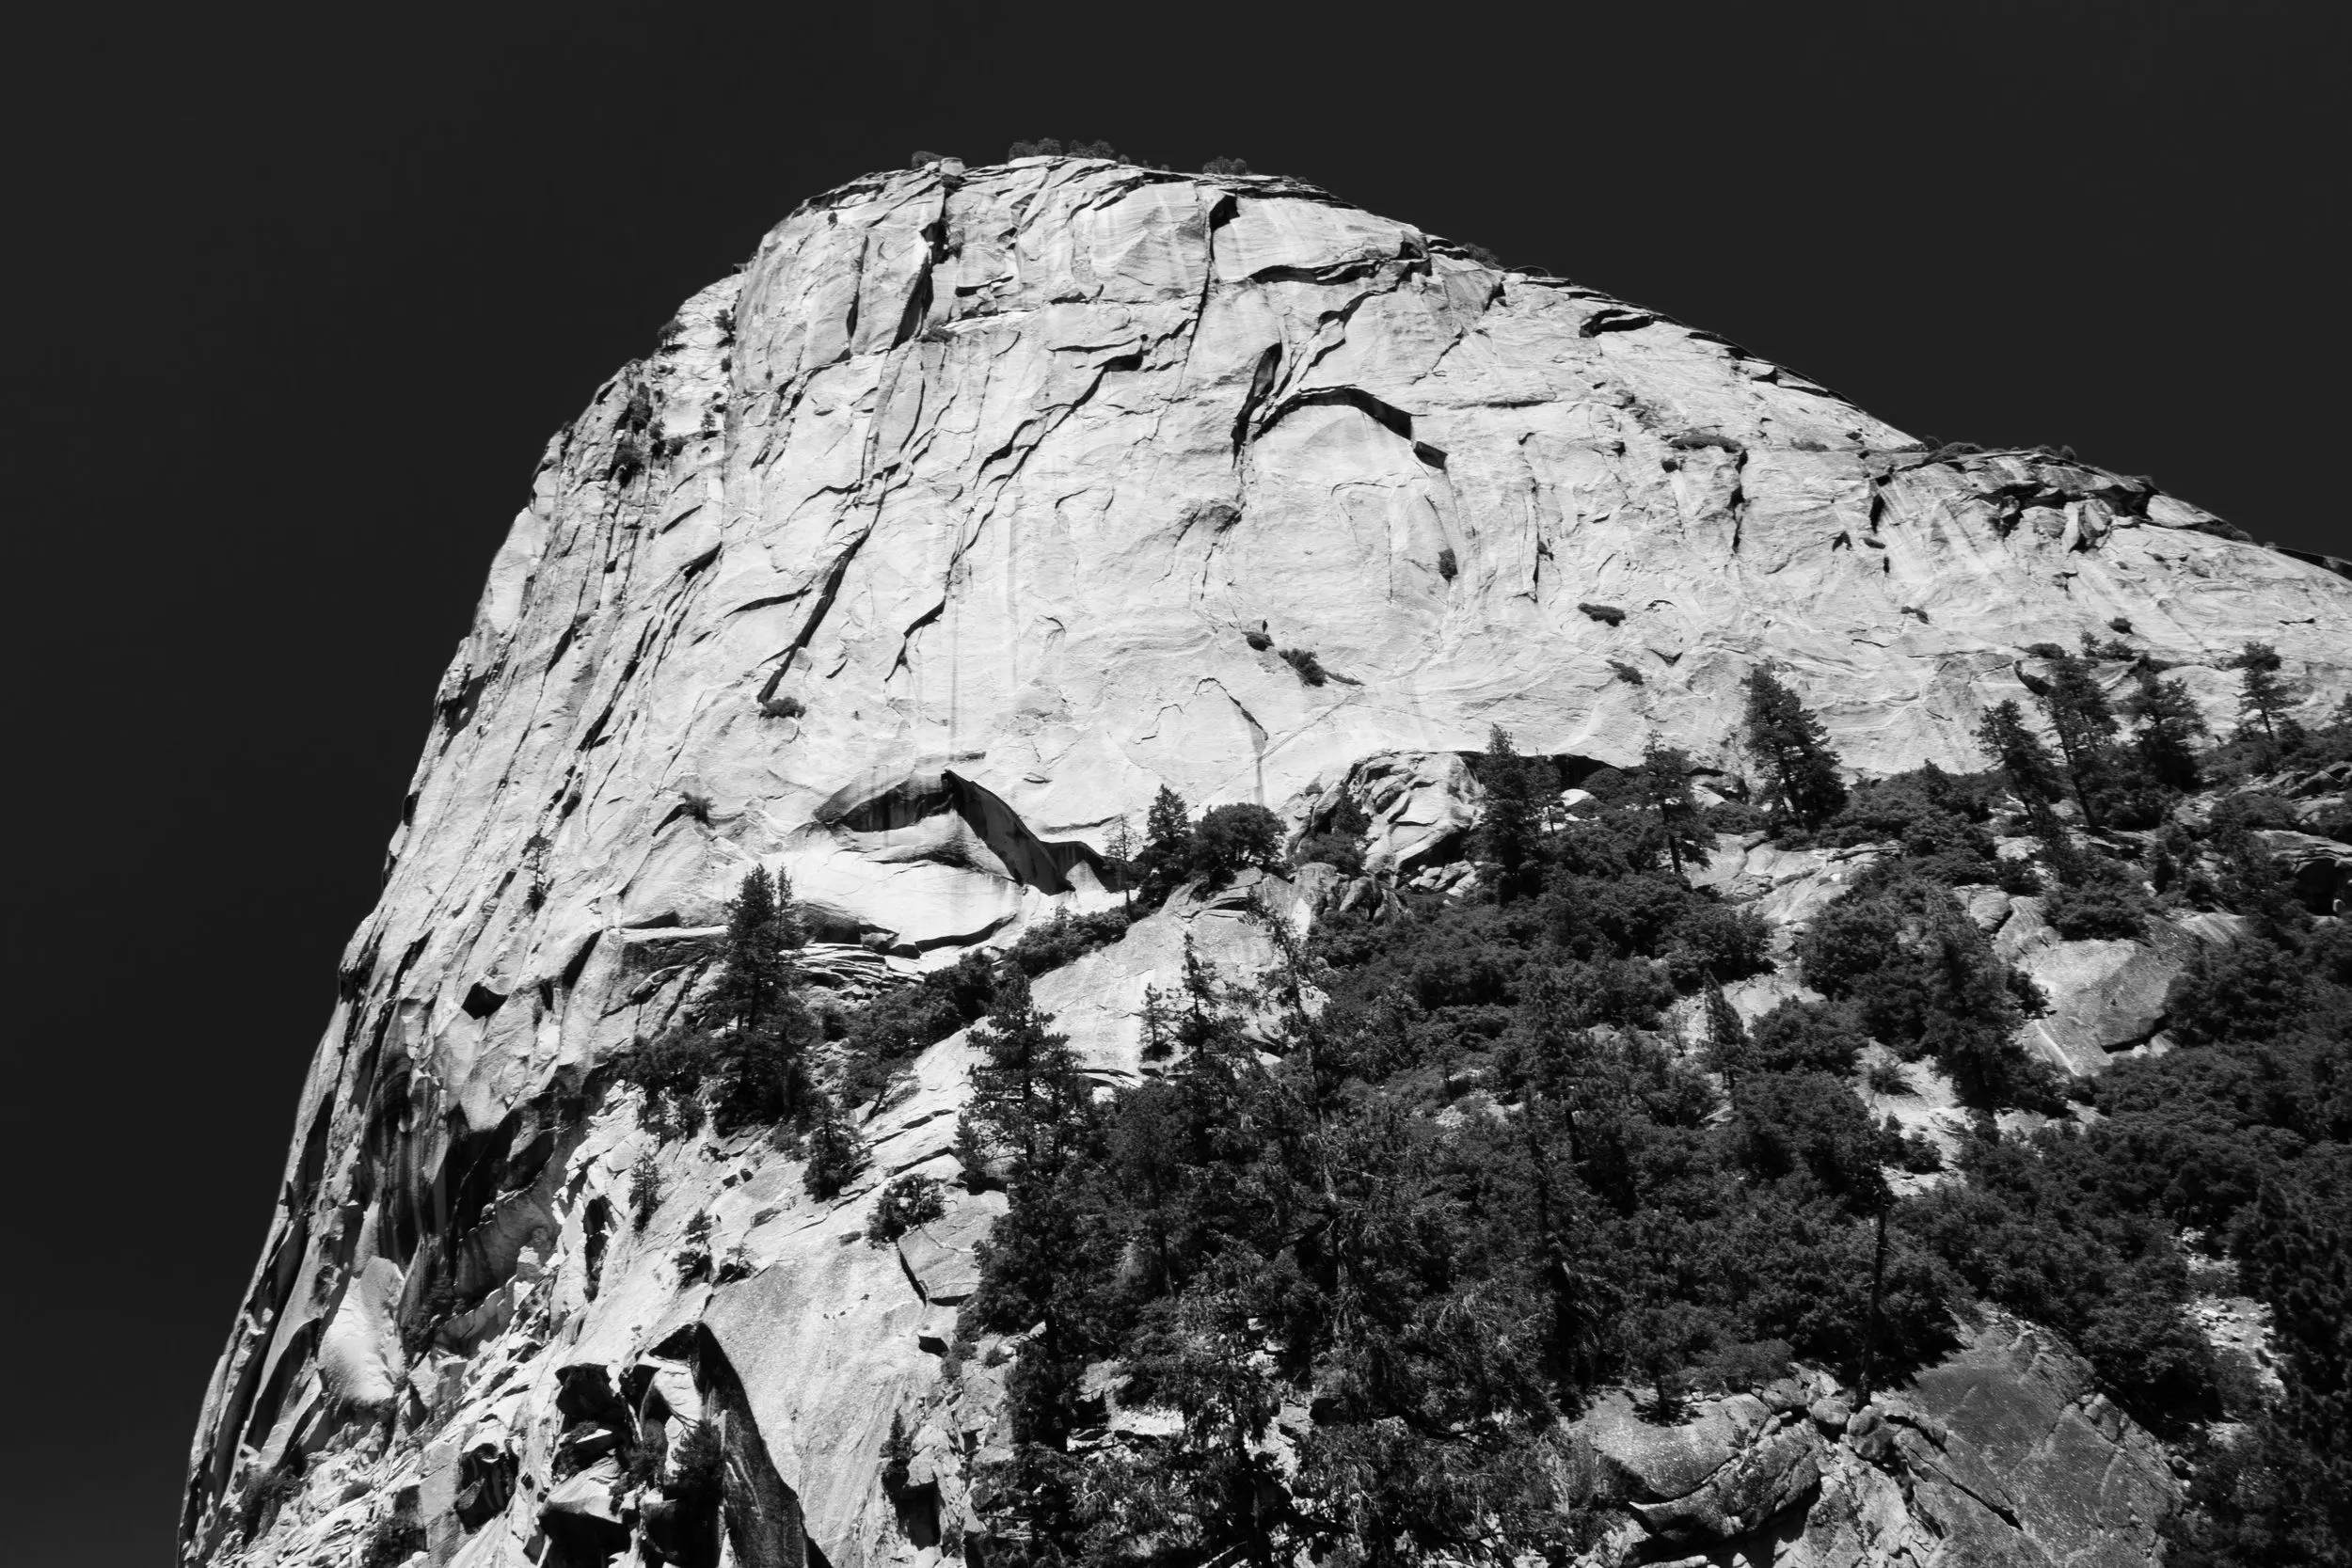 Black and white low-angle shot of Liberty Cap.